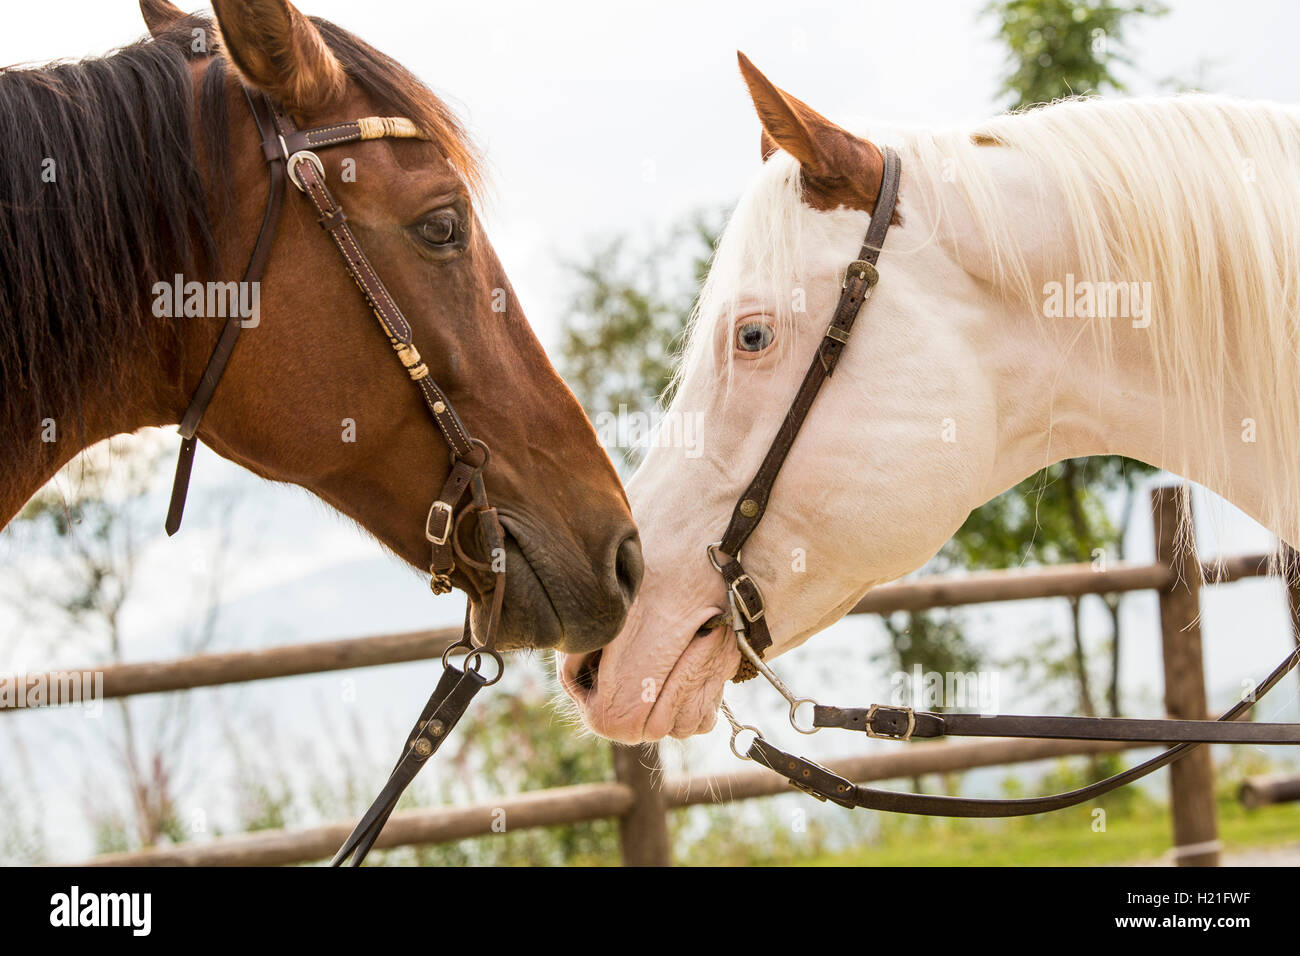 Heads of a brown and a white horse, close up Stock Photo